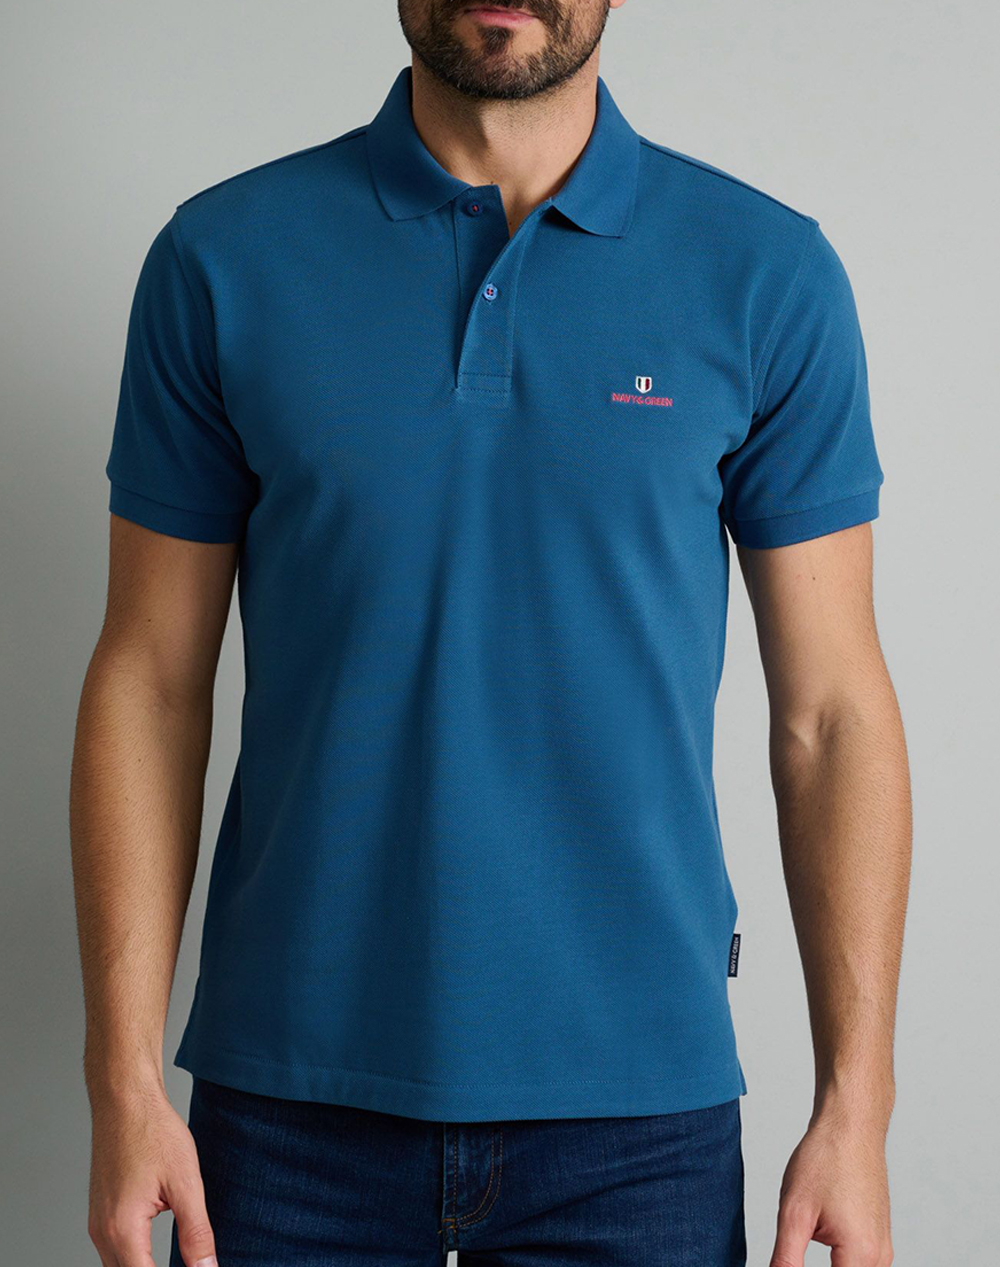 NAVY&GREEN POLO ΜΠΛΟΥΖΑΚΙ-CUSTOM FIT 24GE.300.7-AIRFORCE BLUE SteelBlue